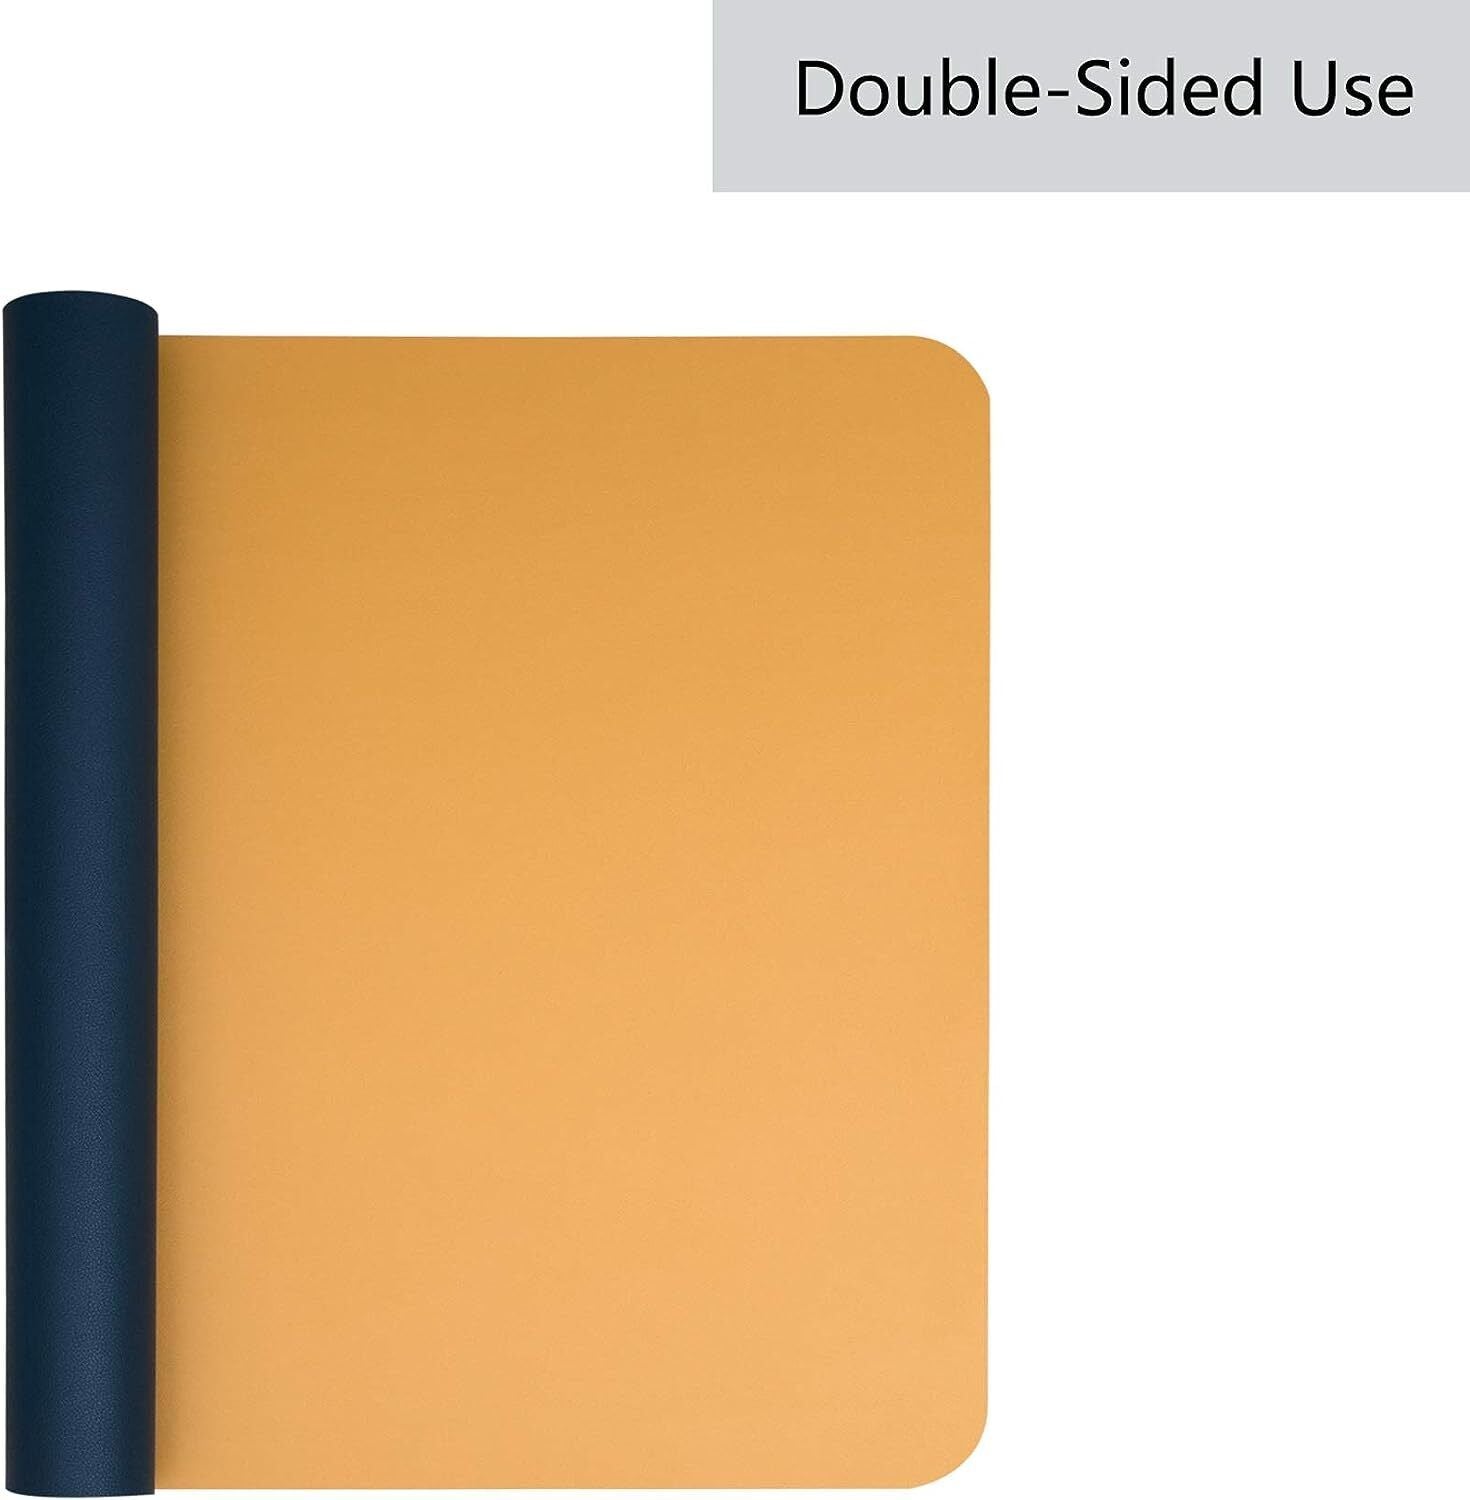 Dual Sided Desk Pad Protector For Office Waterproof 80cm x 40cm Blue & Yellow - RLO Tech